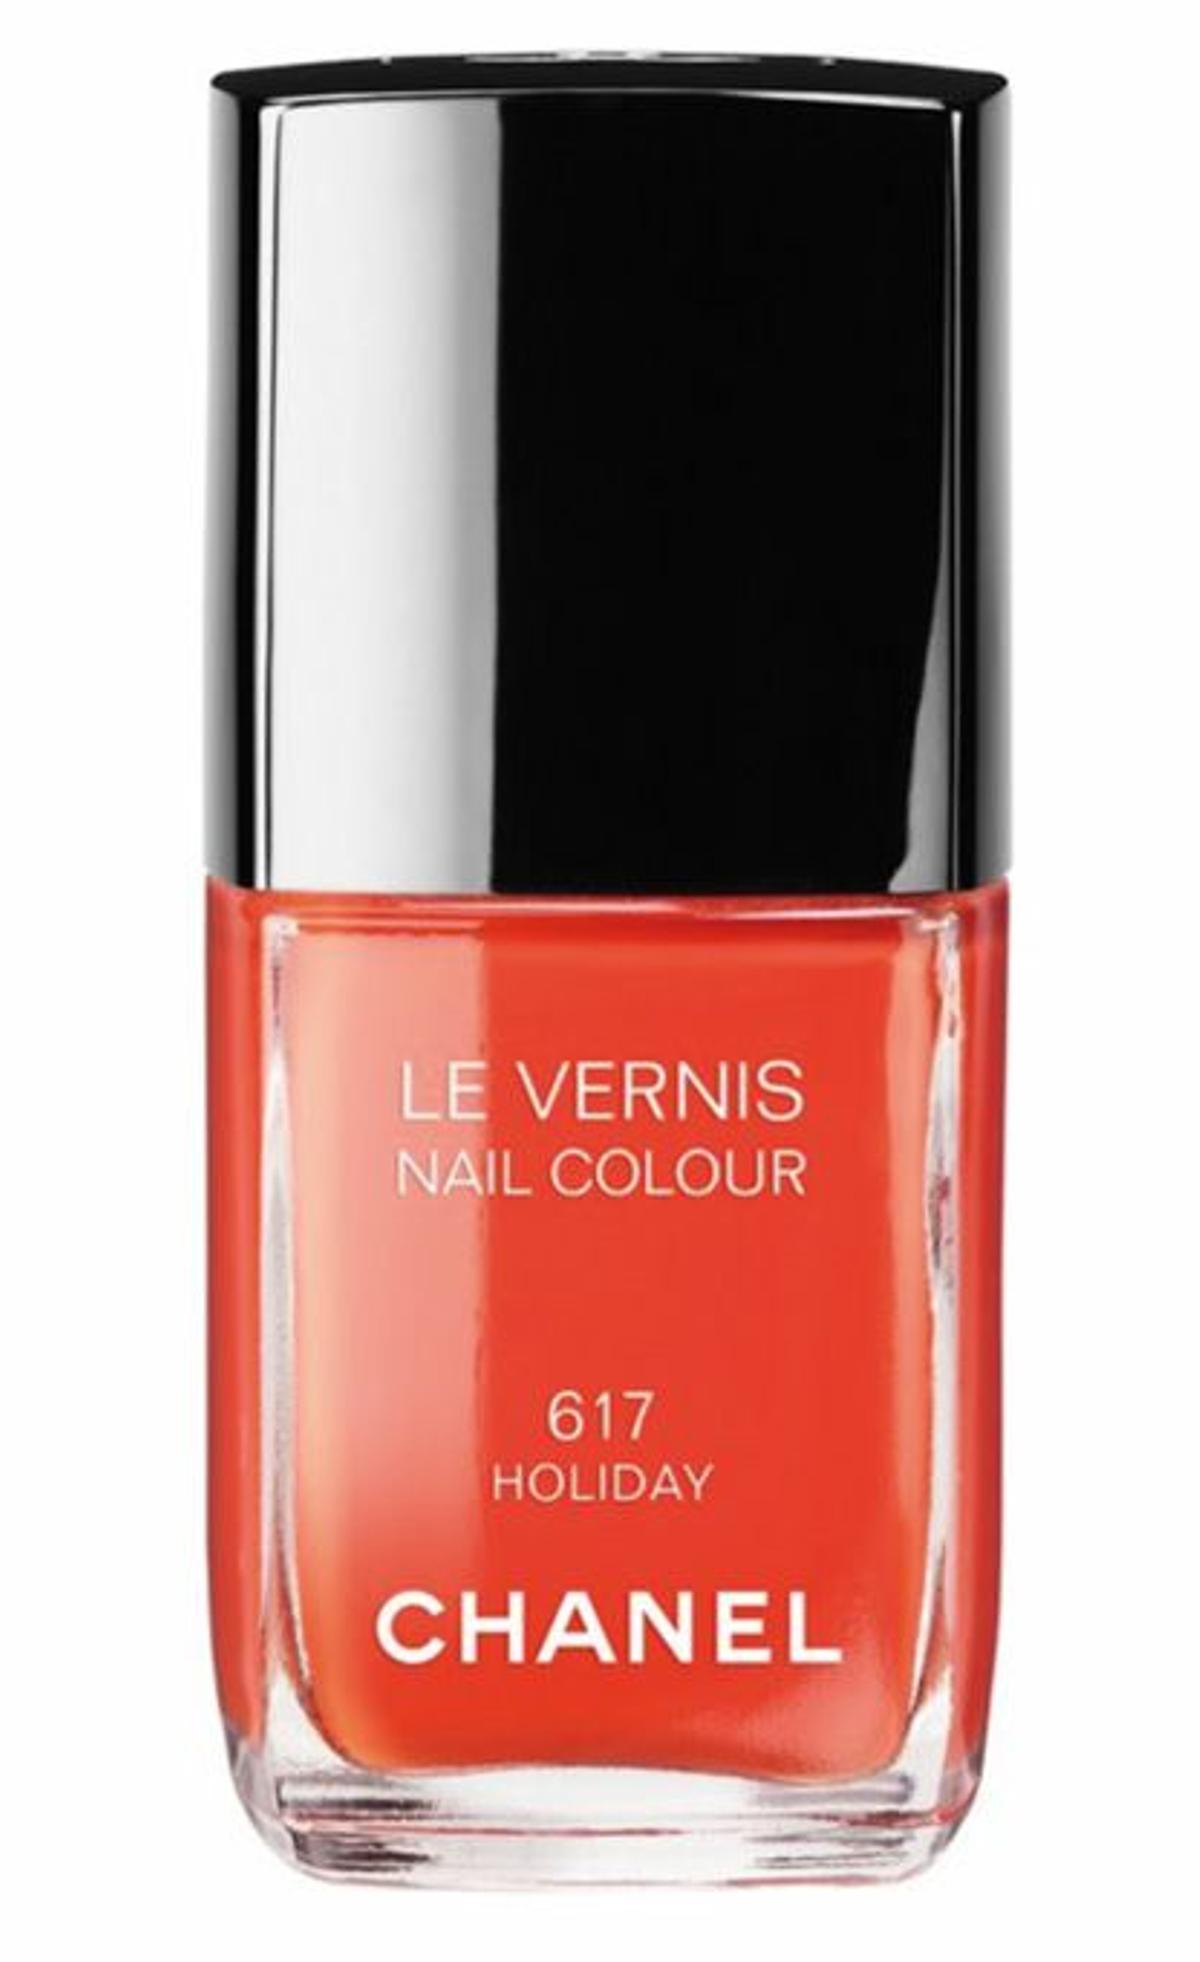 Le Vernis Holiday Chanel (23,50 €).